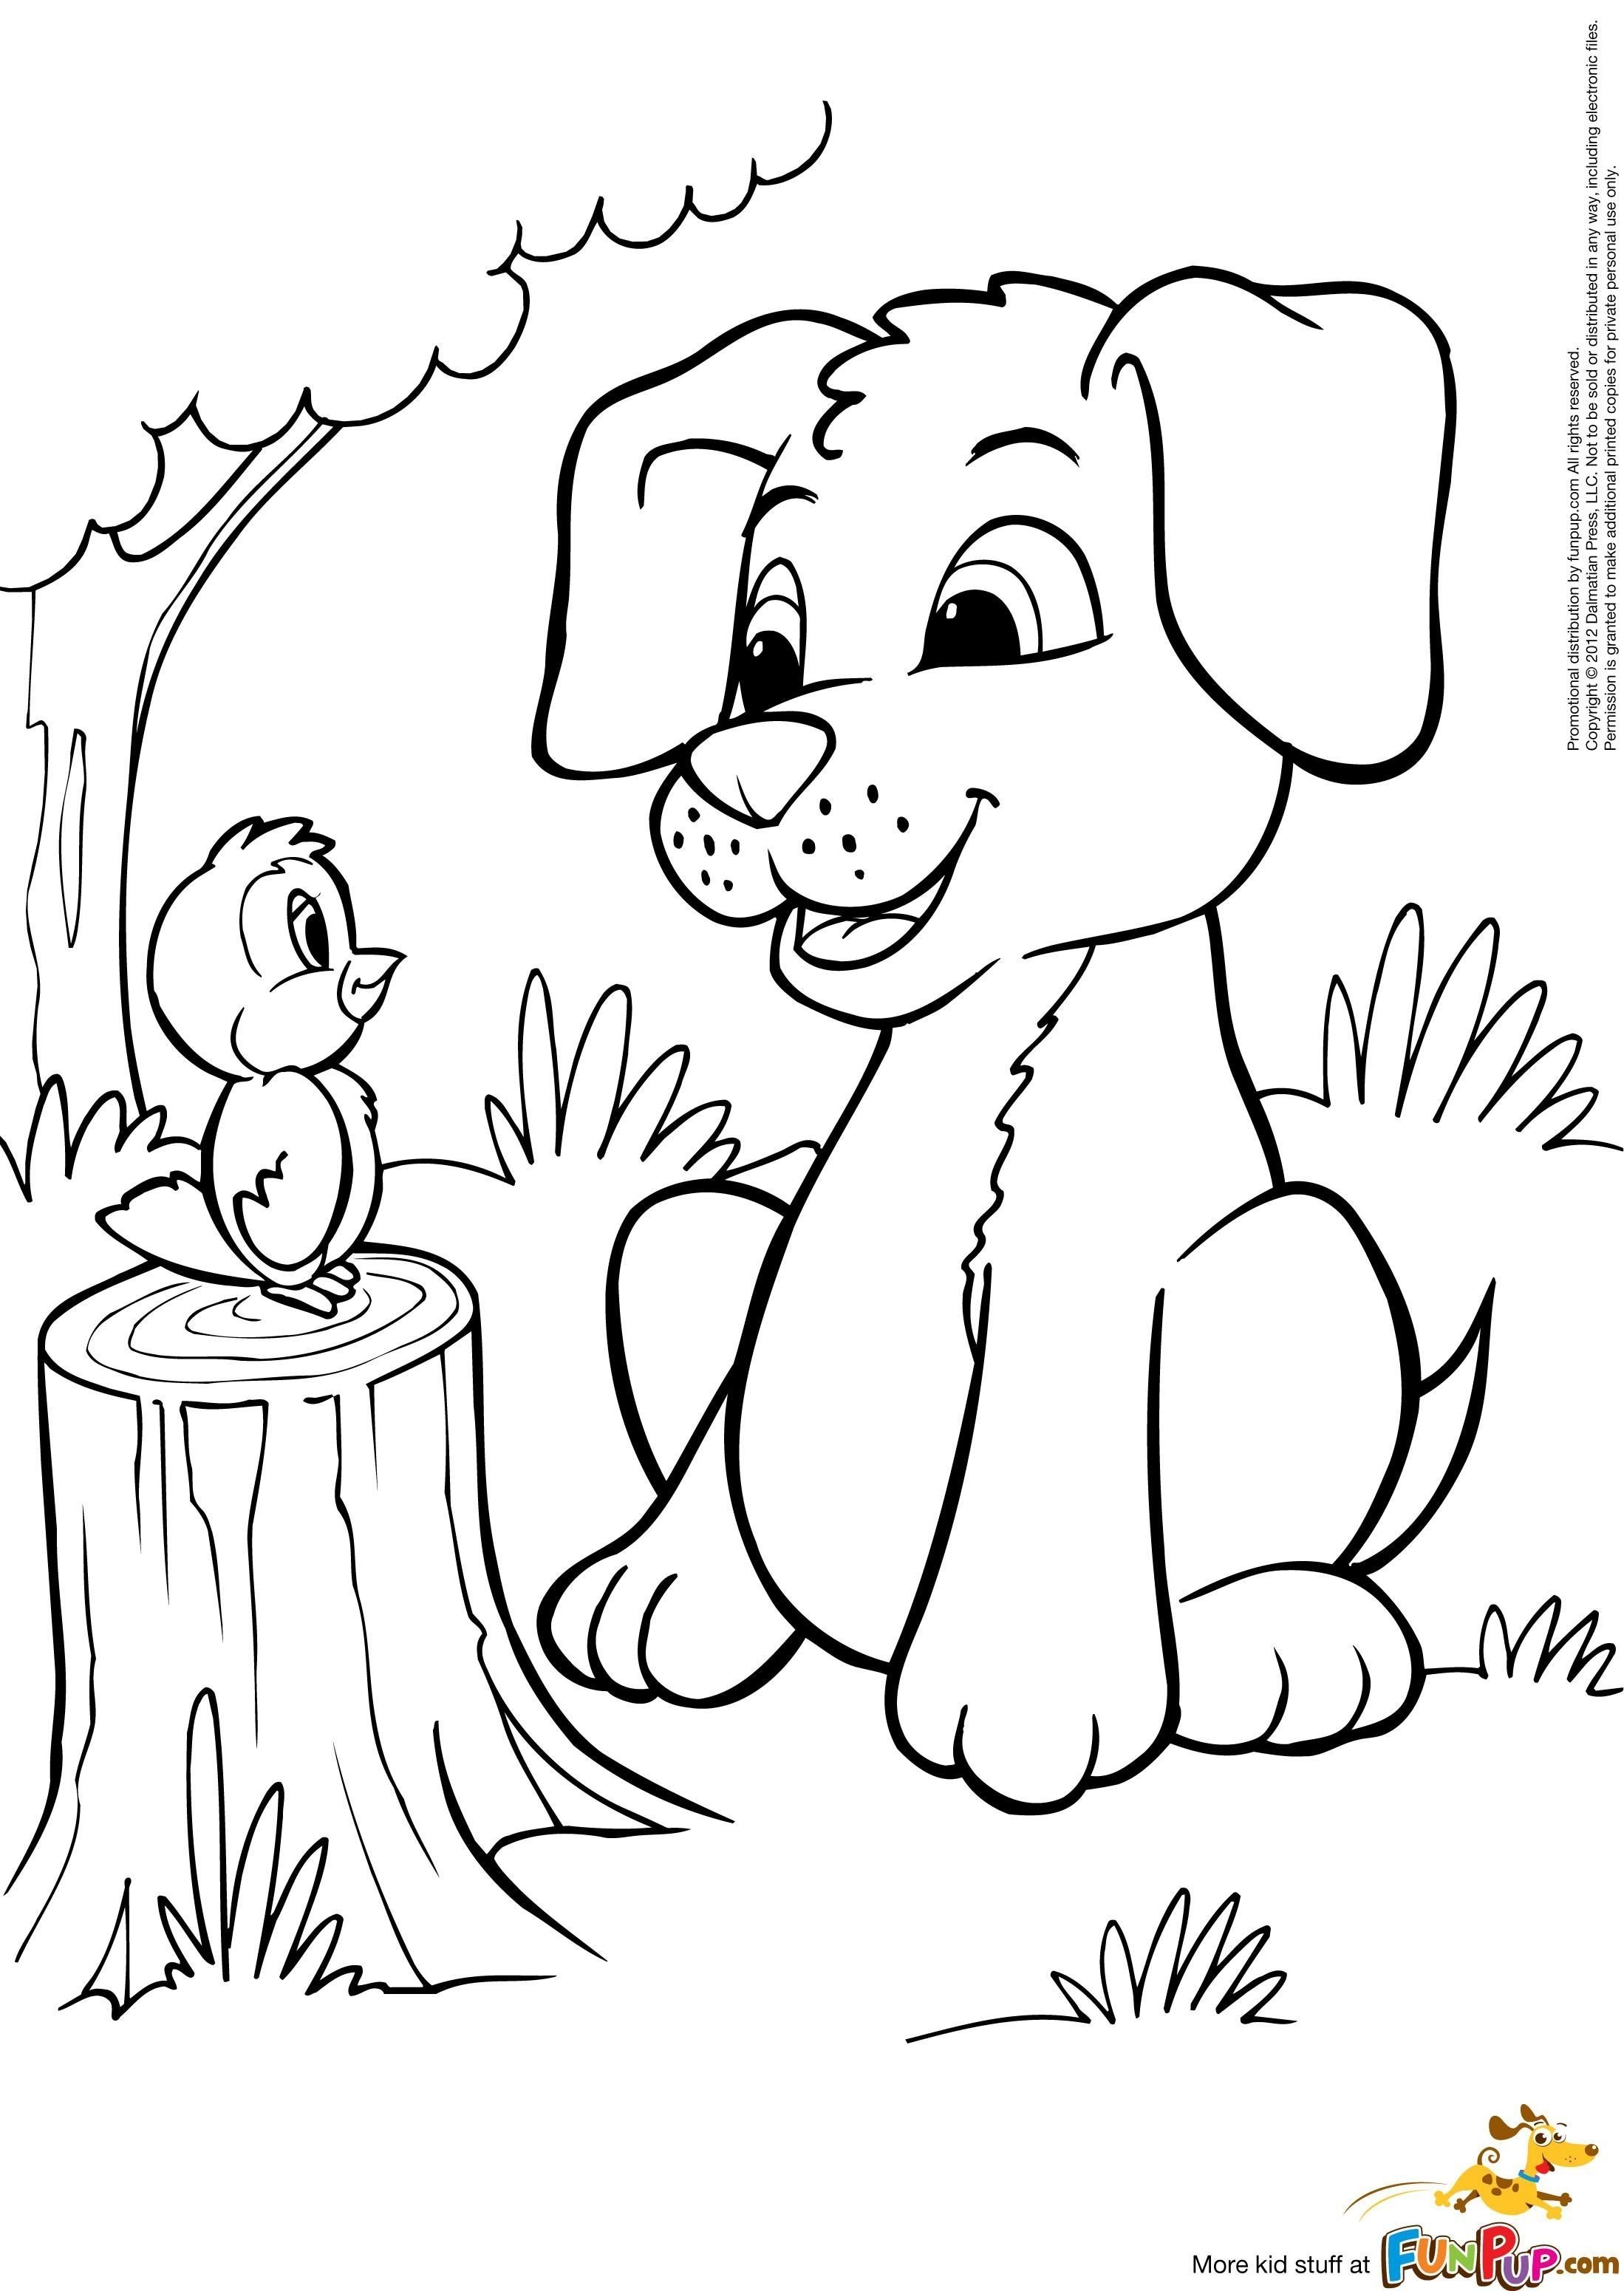 Annabelle Coloring Pages at GetColorings.com | Free ...